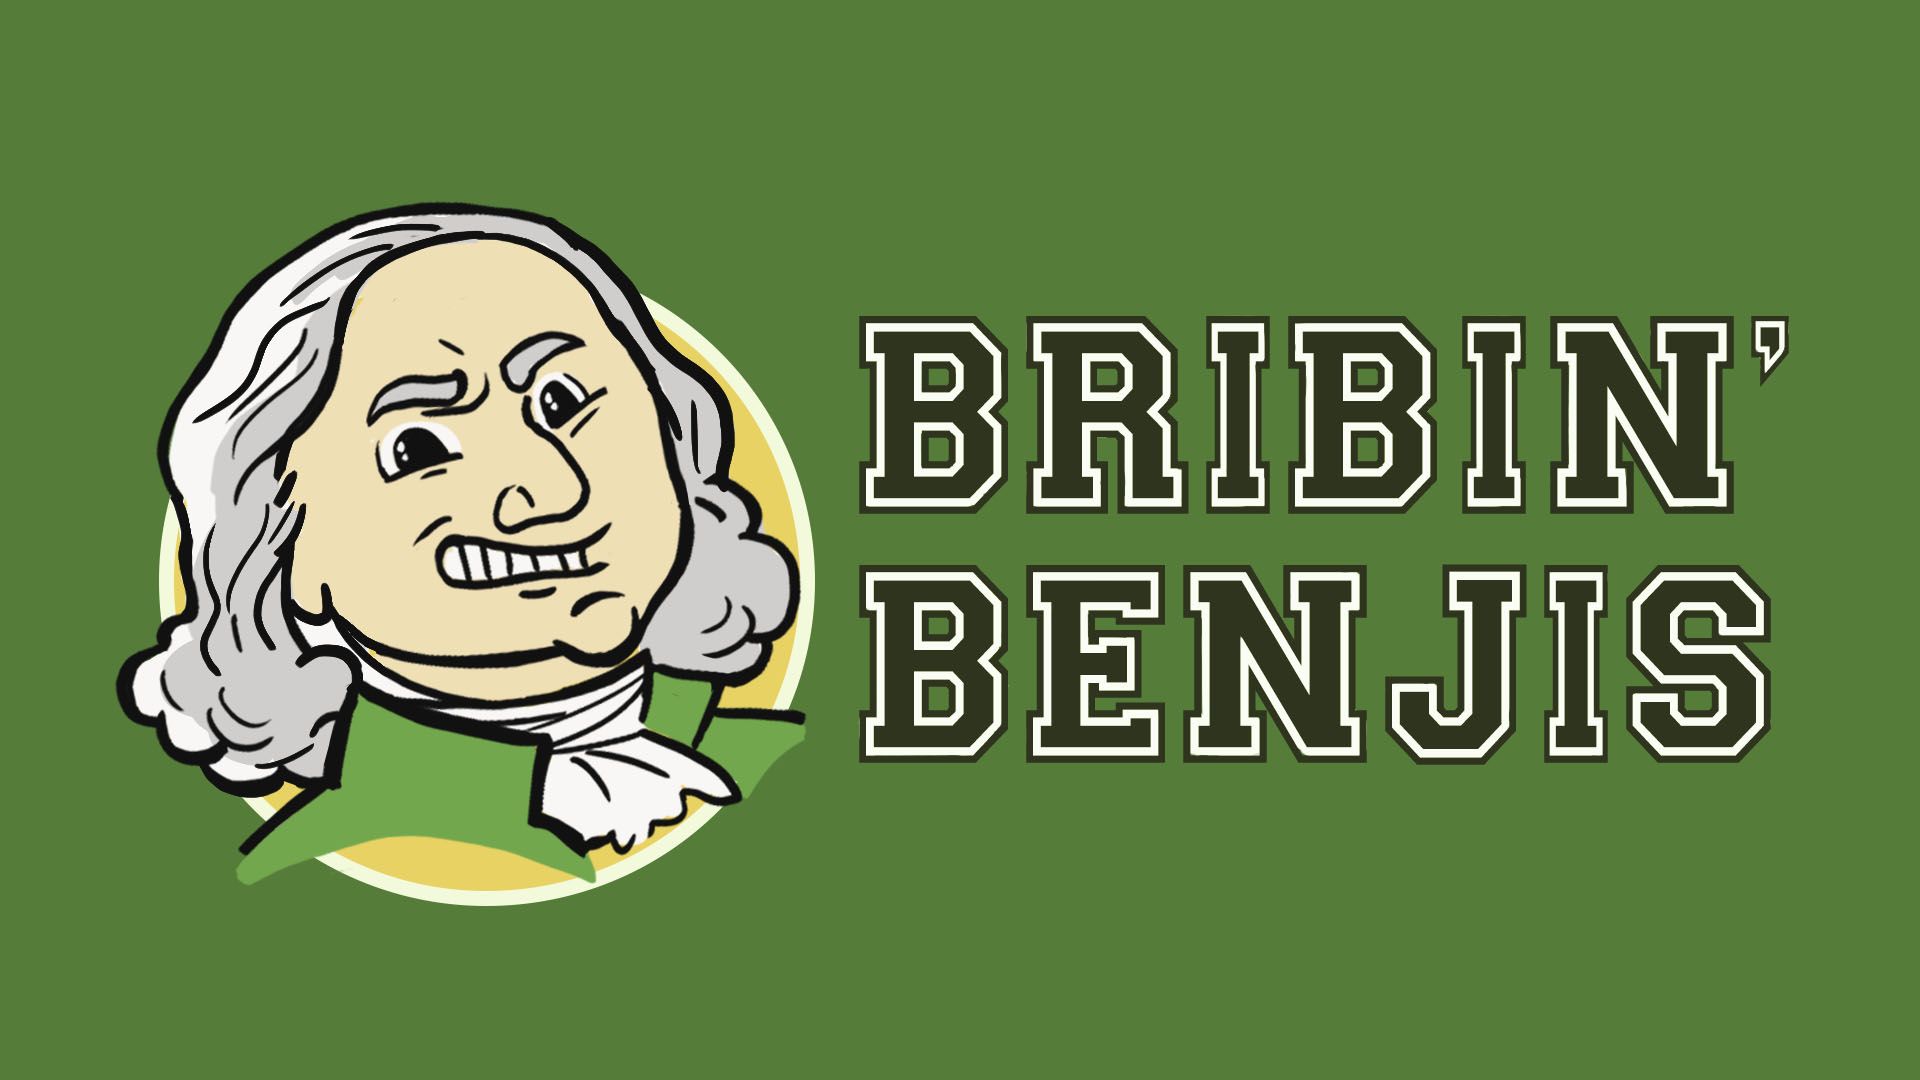 Illustration of a college mascot and logo featuring Benjamin Franklin and the words "Bribin' Benjis"